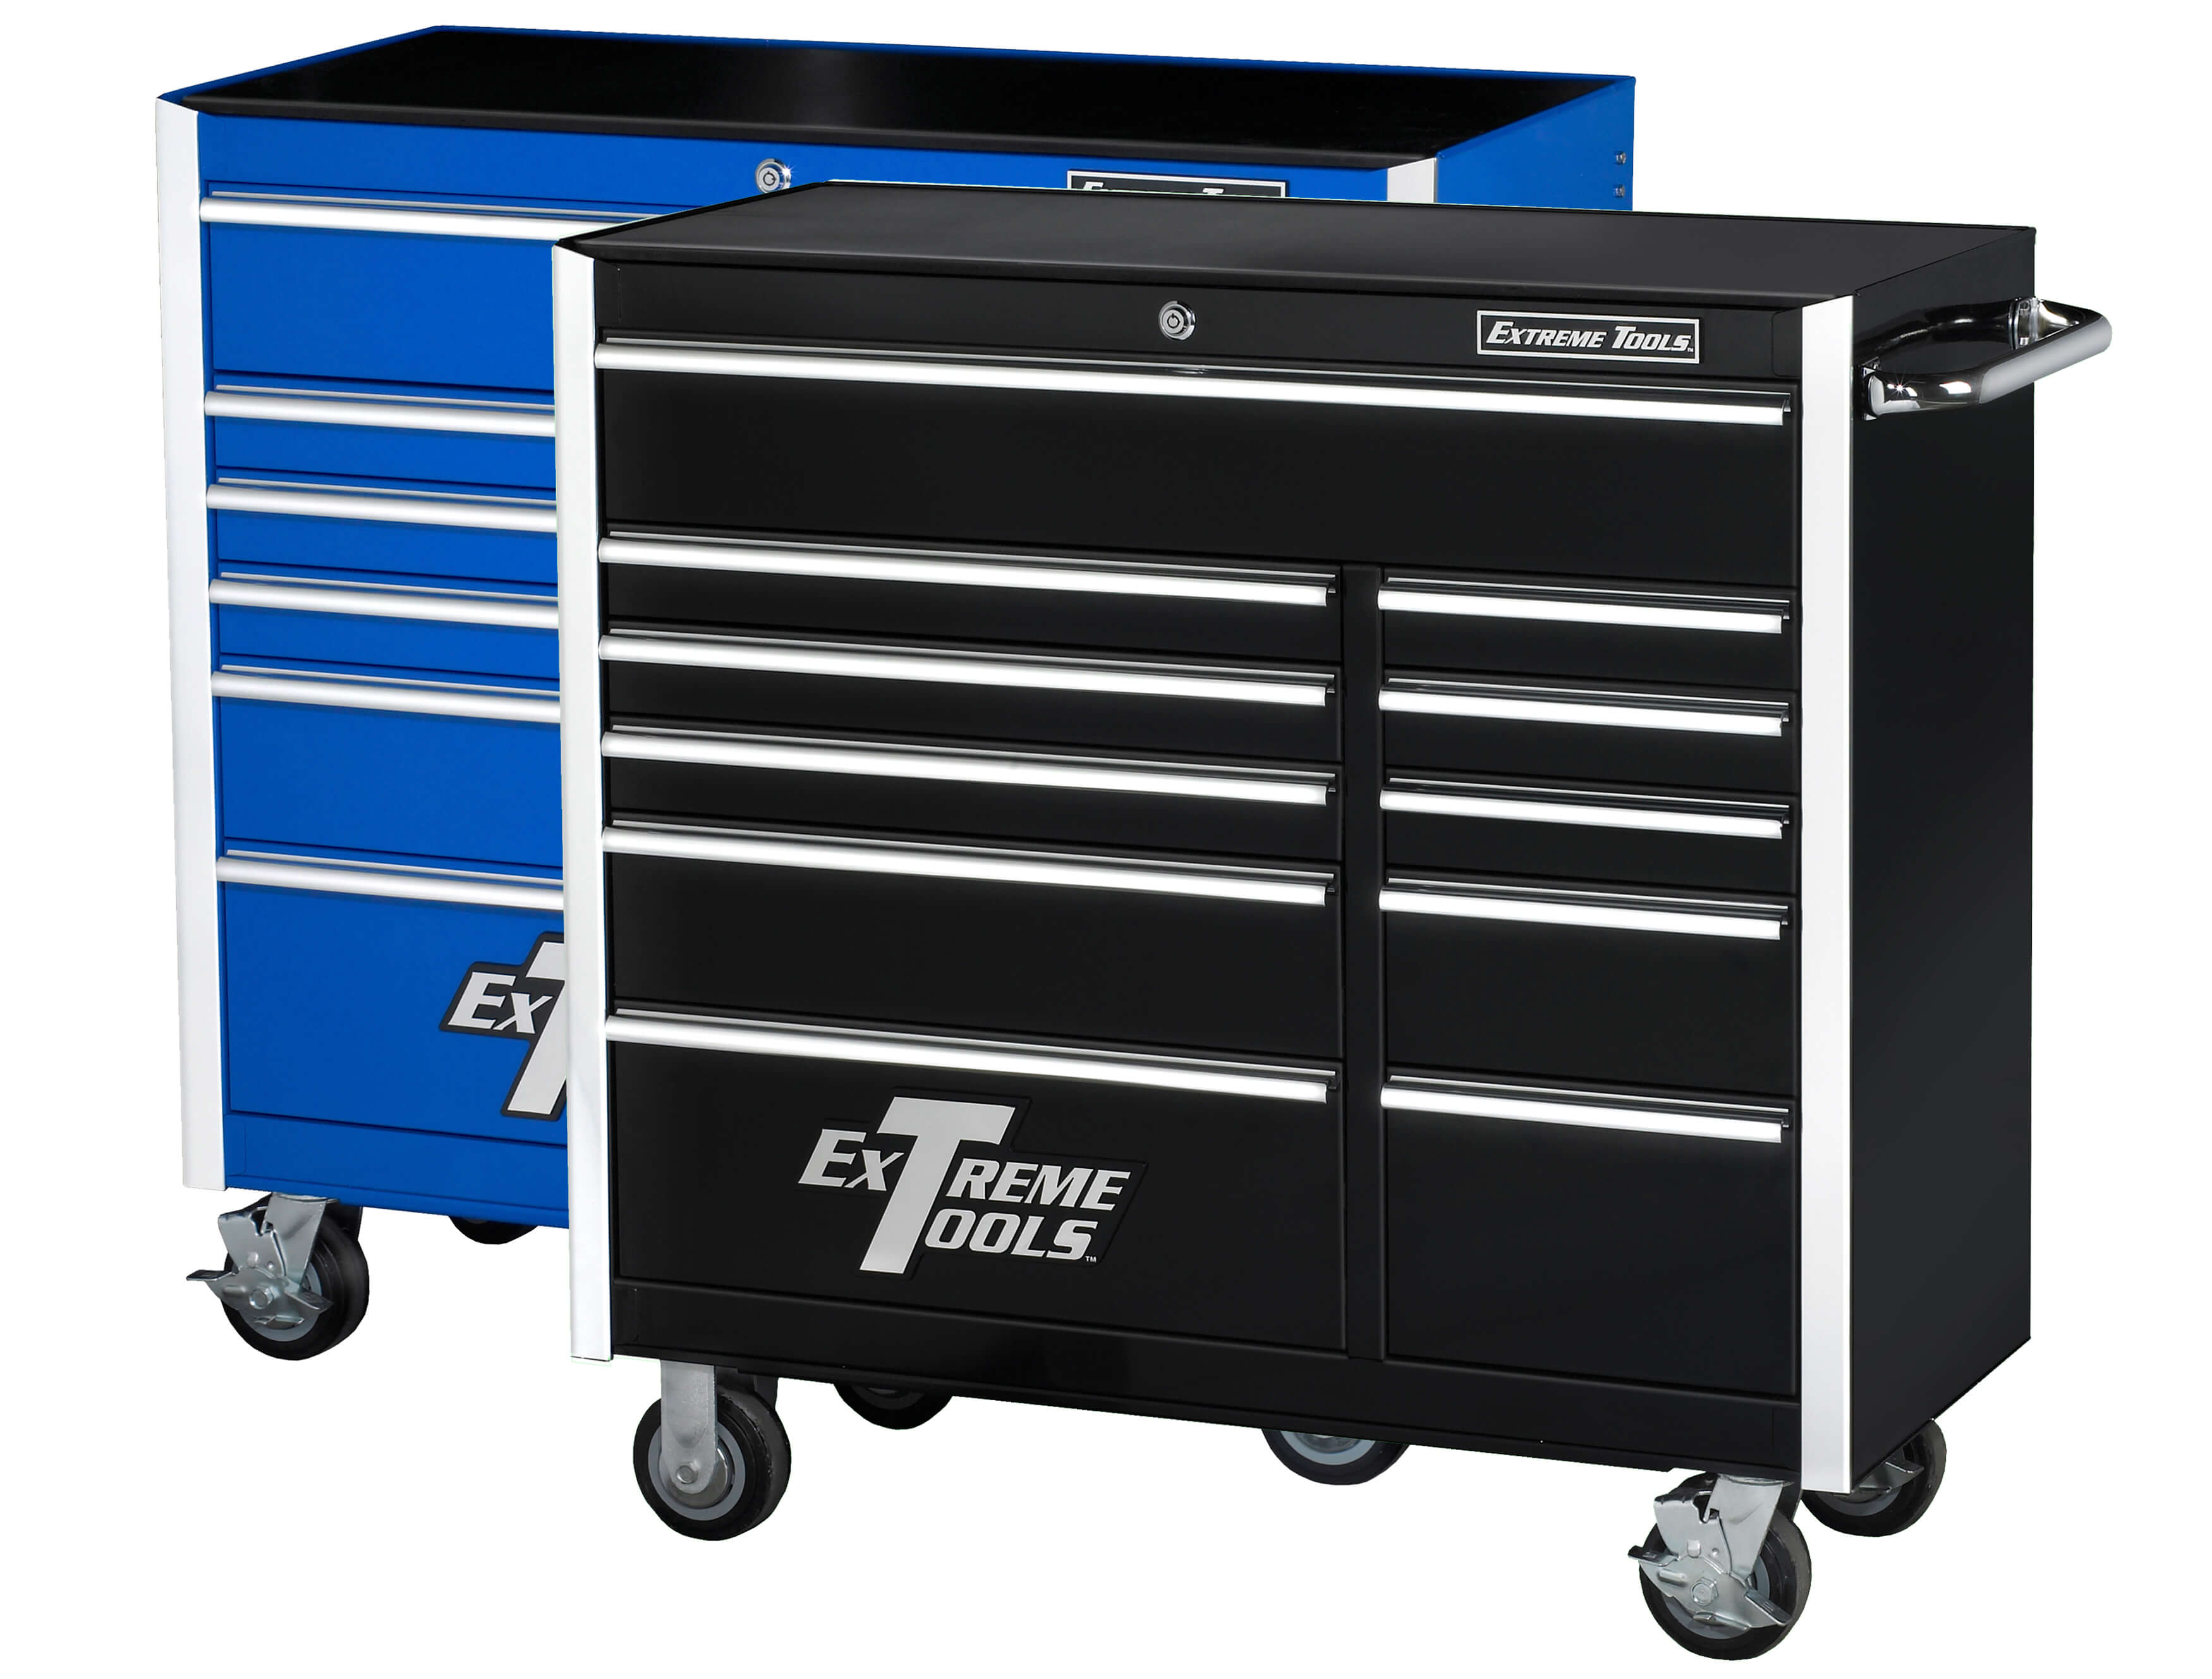 EXTREME TOOLS® 41 inch 11 DRAWER STANDARD ROLLER CABINET